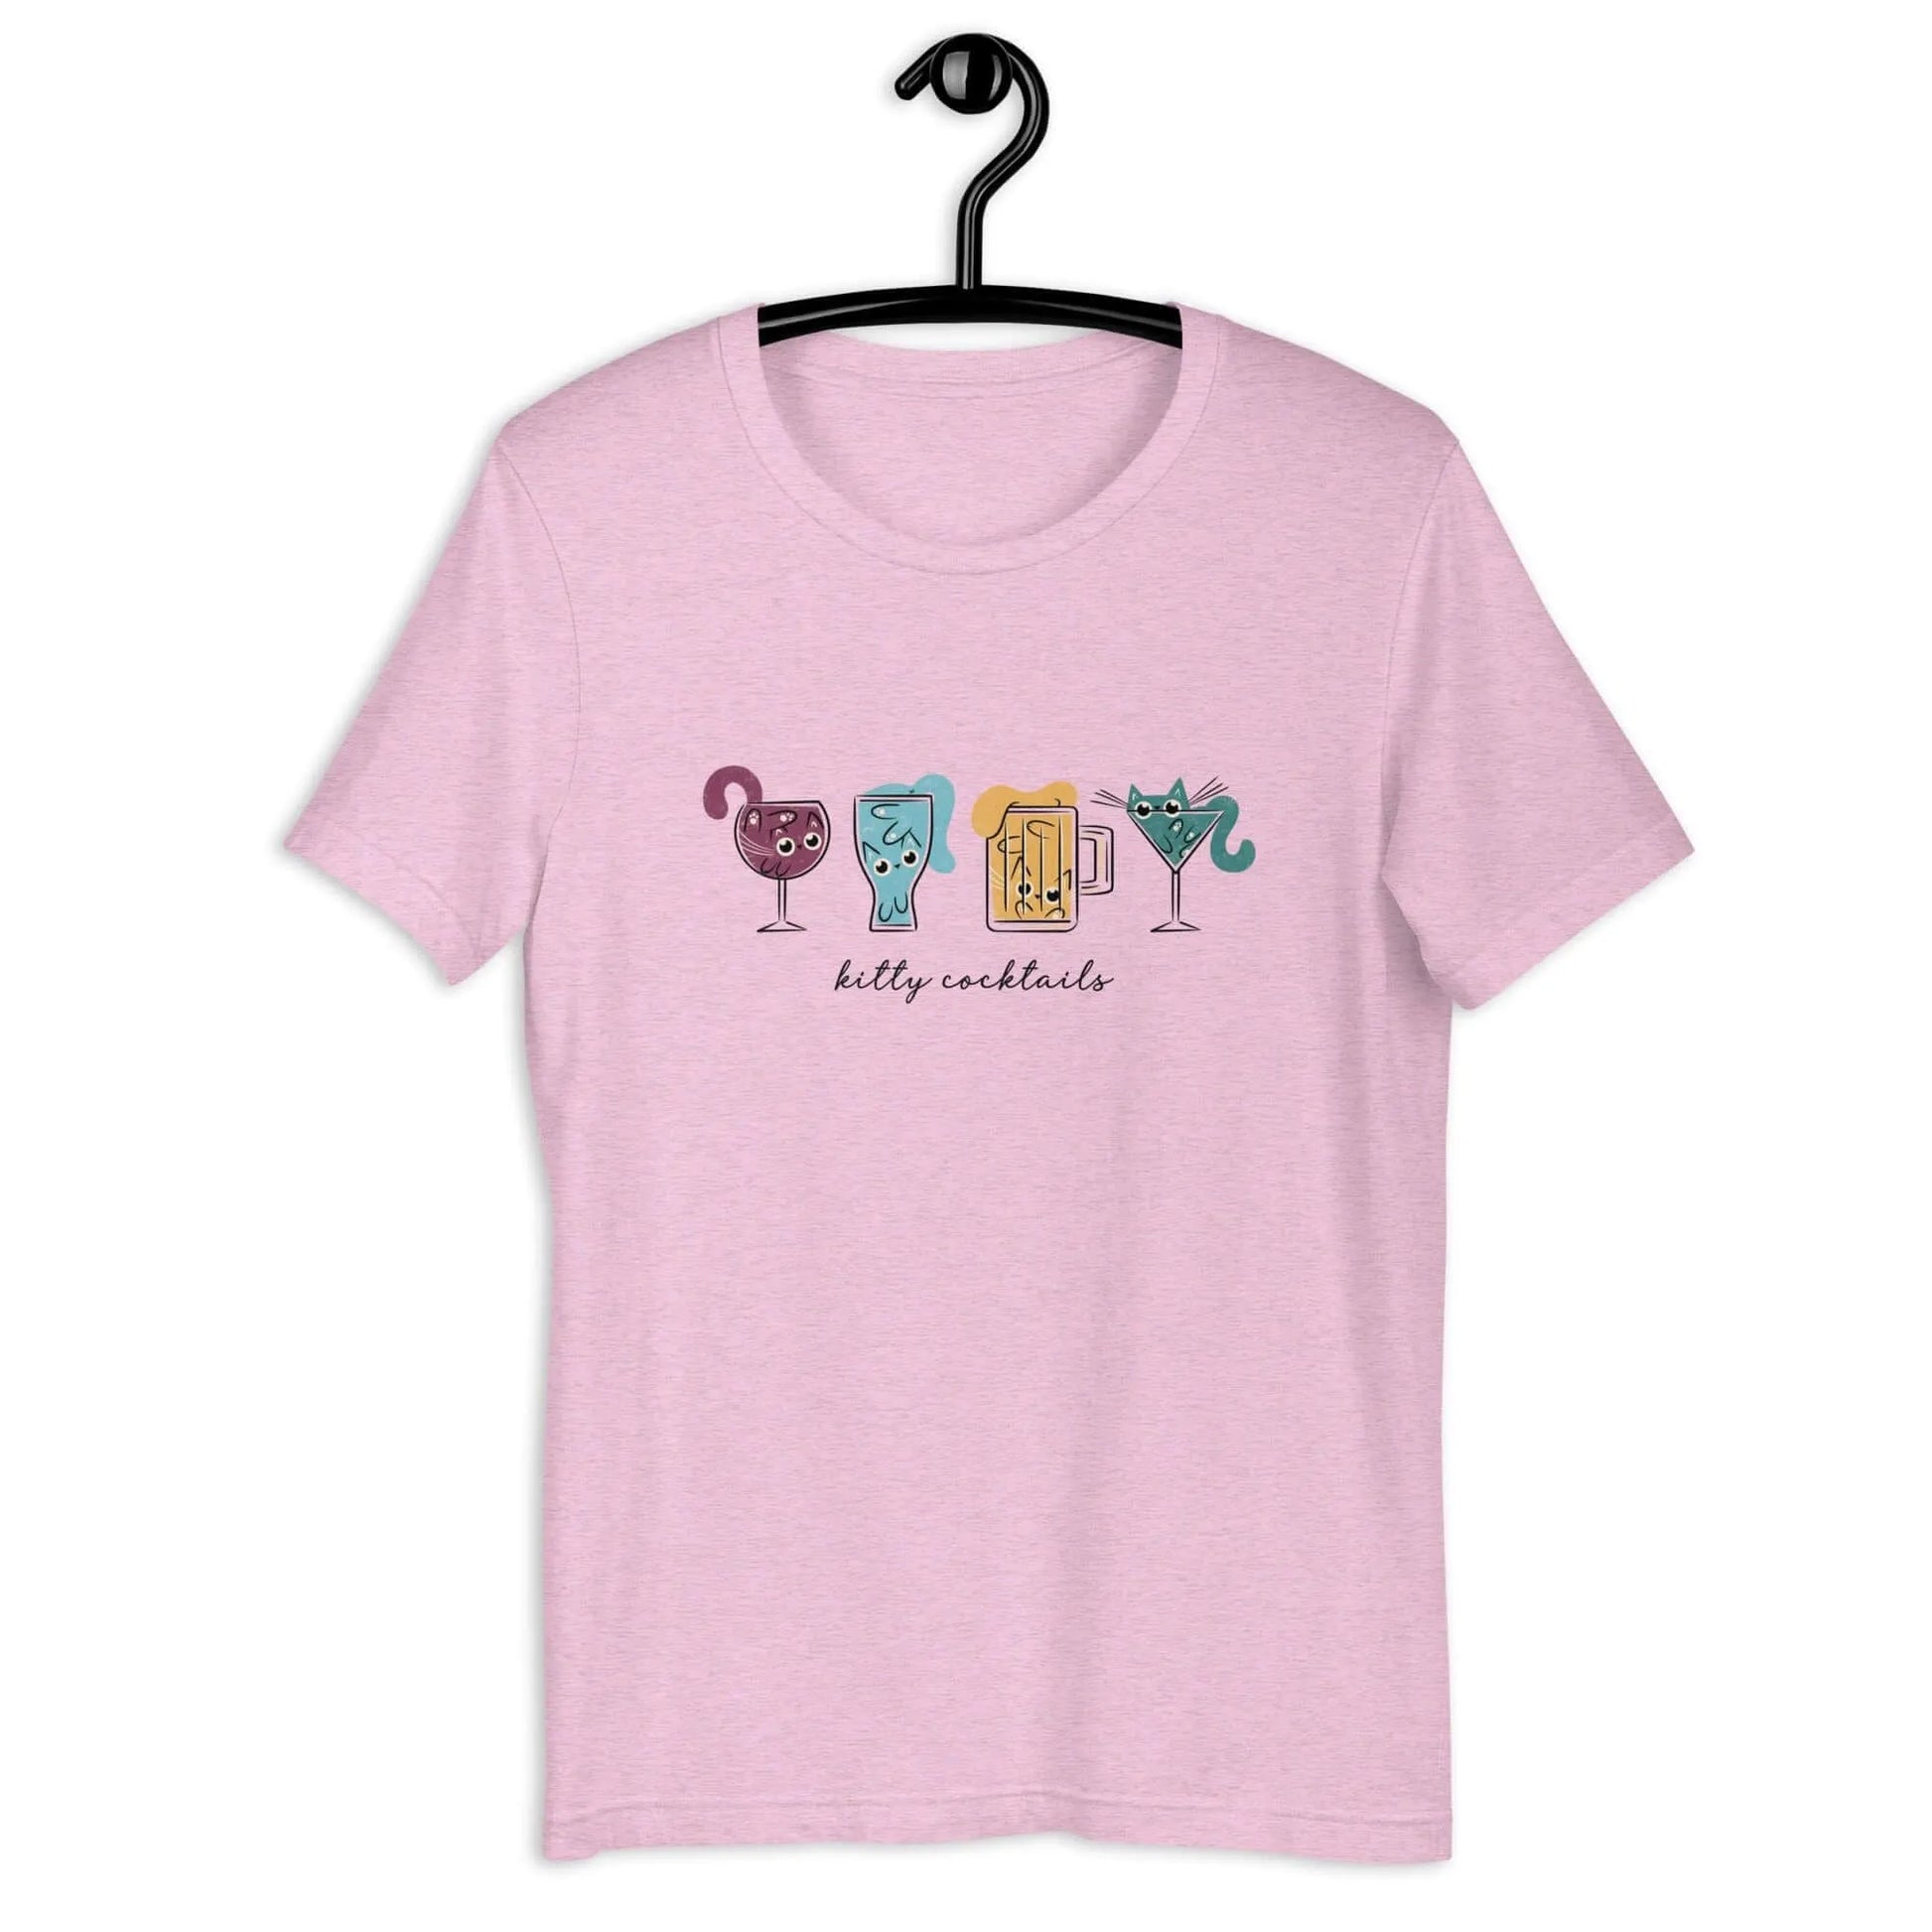 Kitty Cocktails Unisex T-Shirt